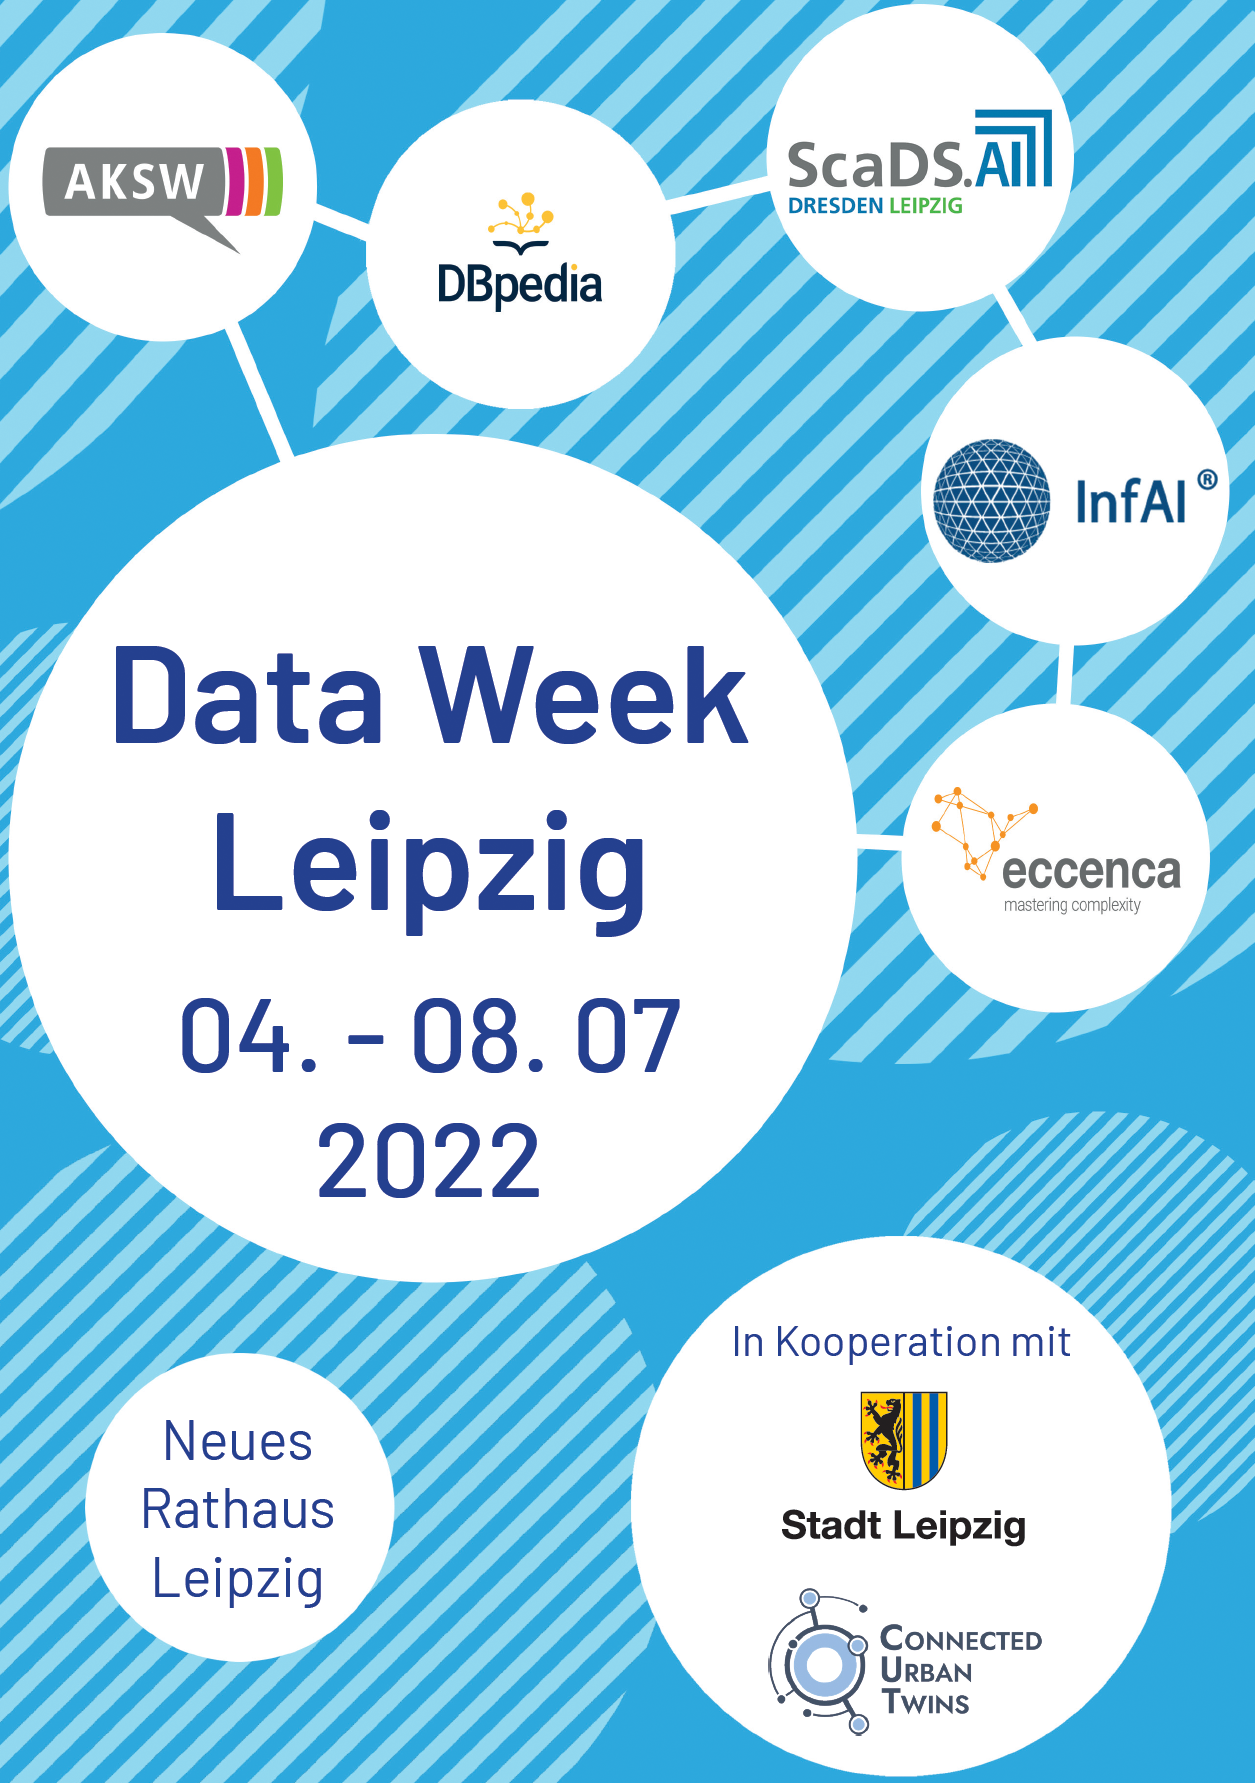 The organizers of Data Week 2022